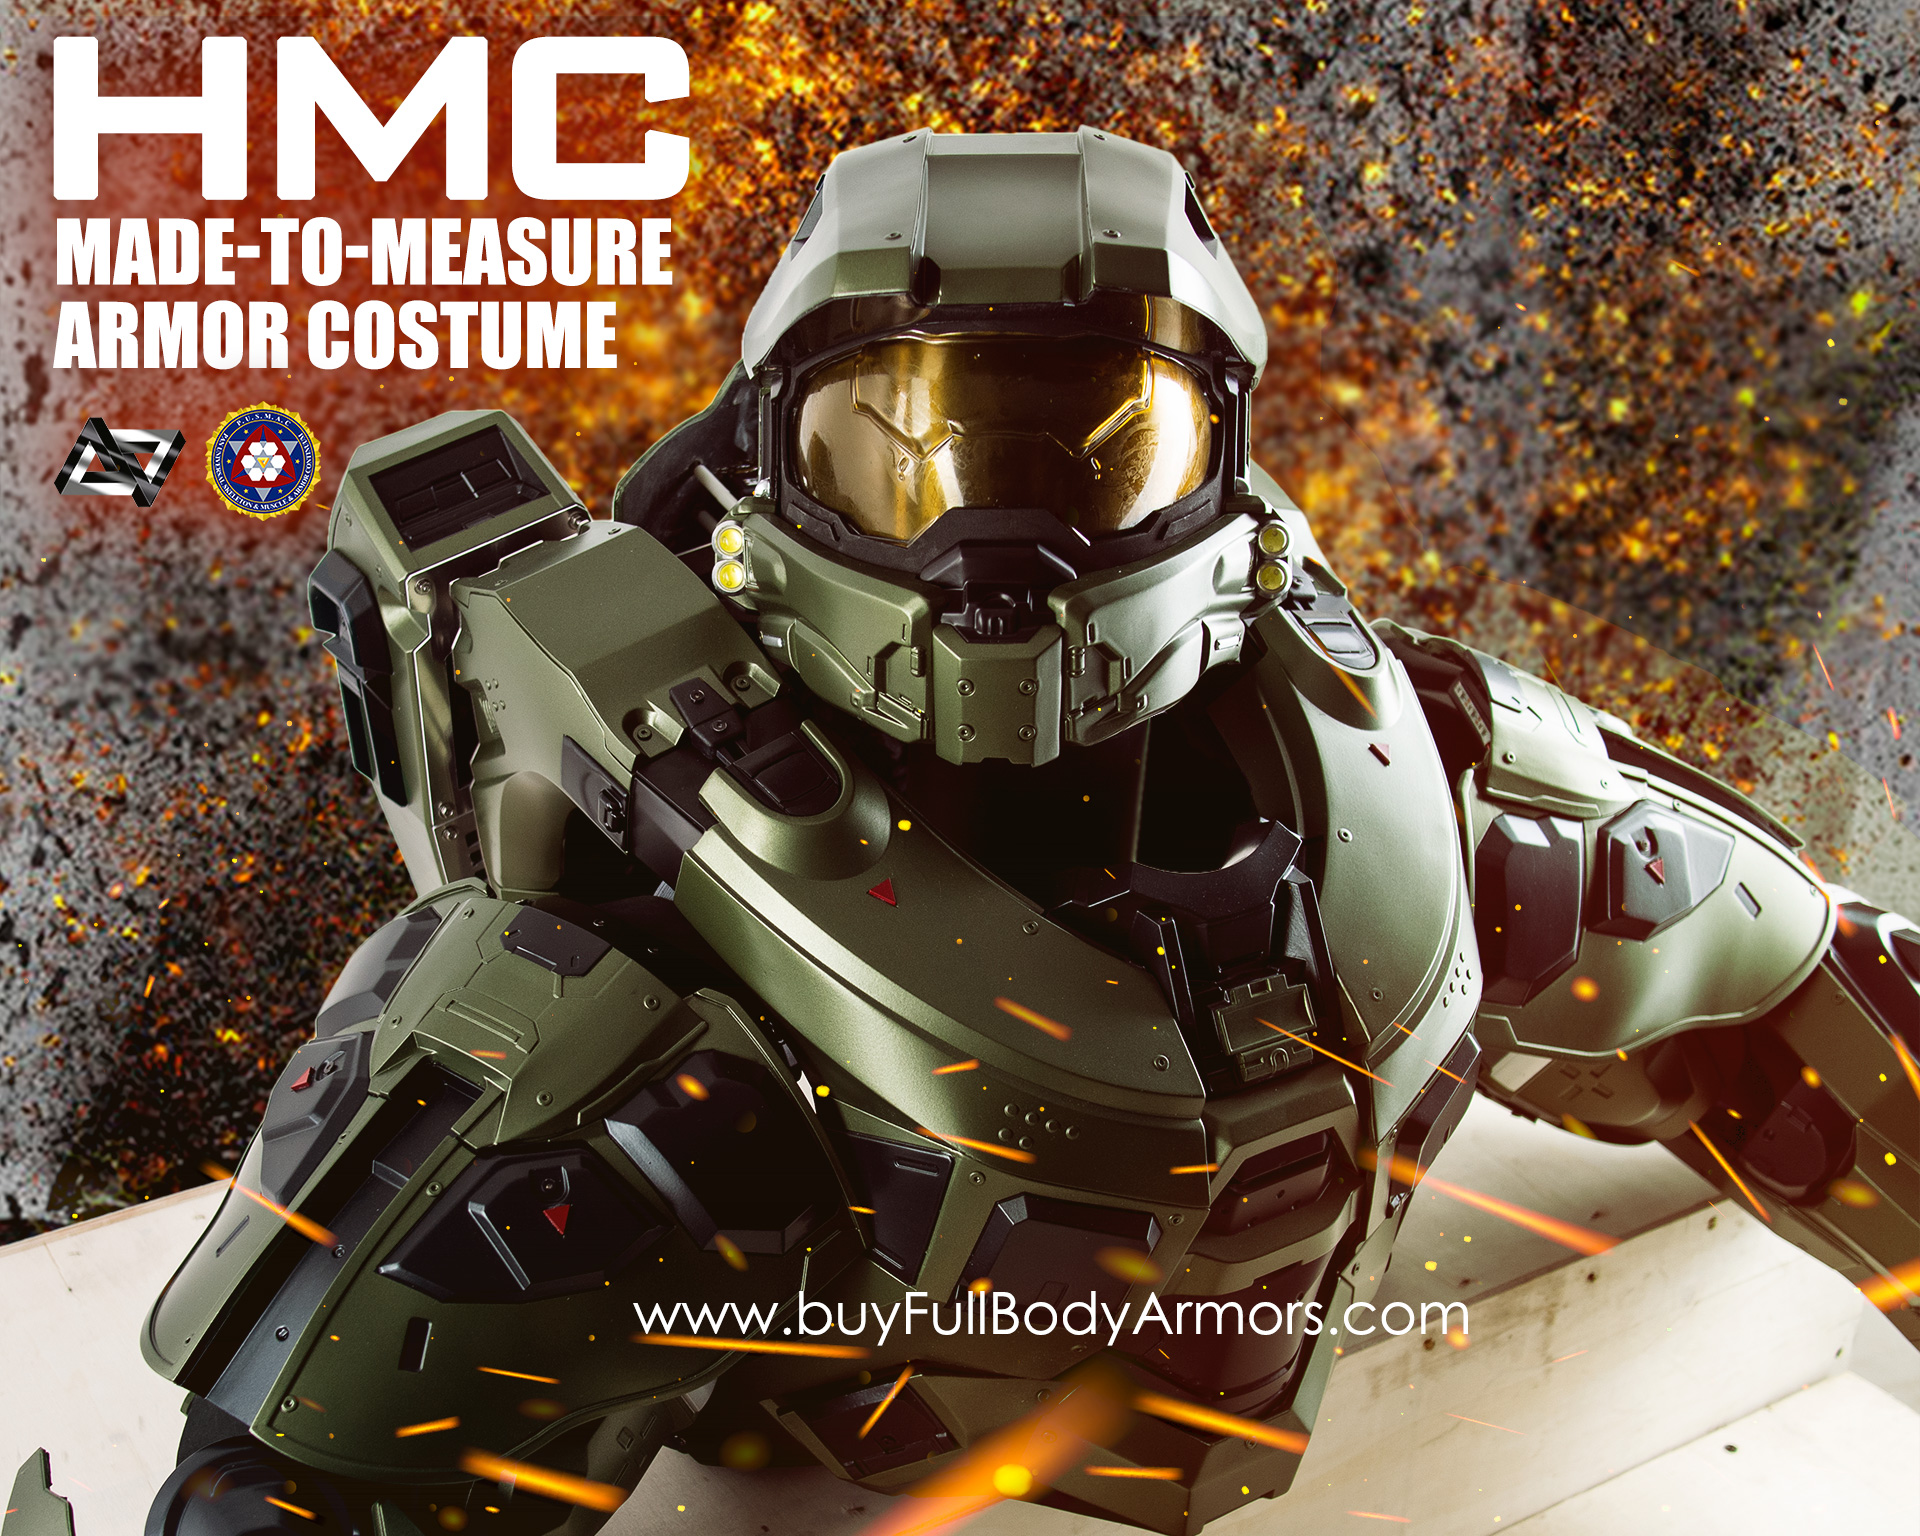 Halo 5 Master Chief Armor Suit Costume on crate 1